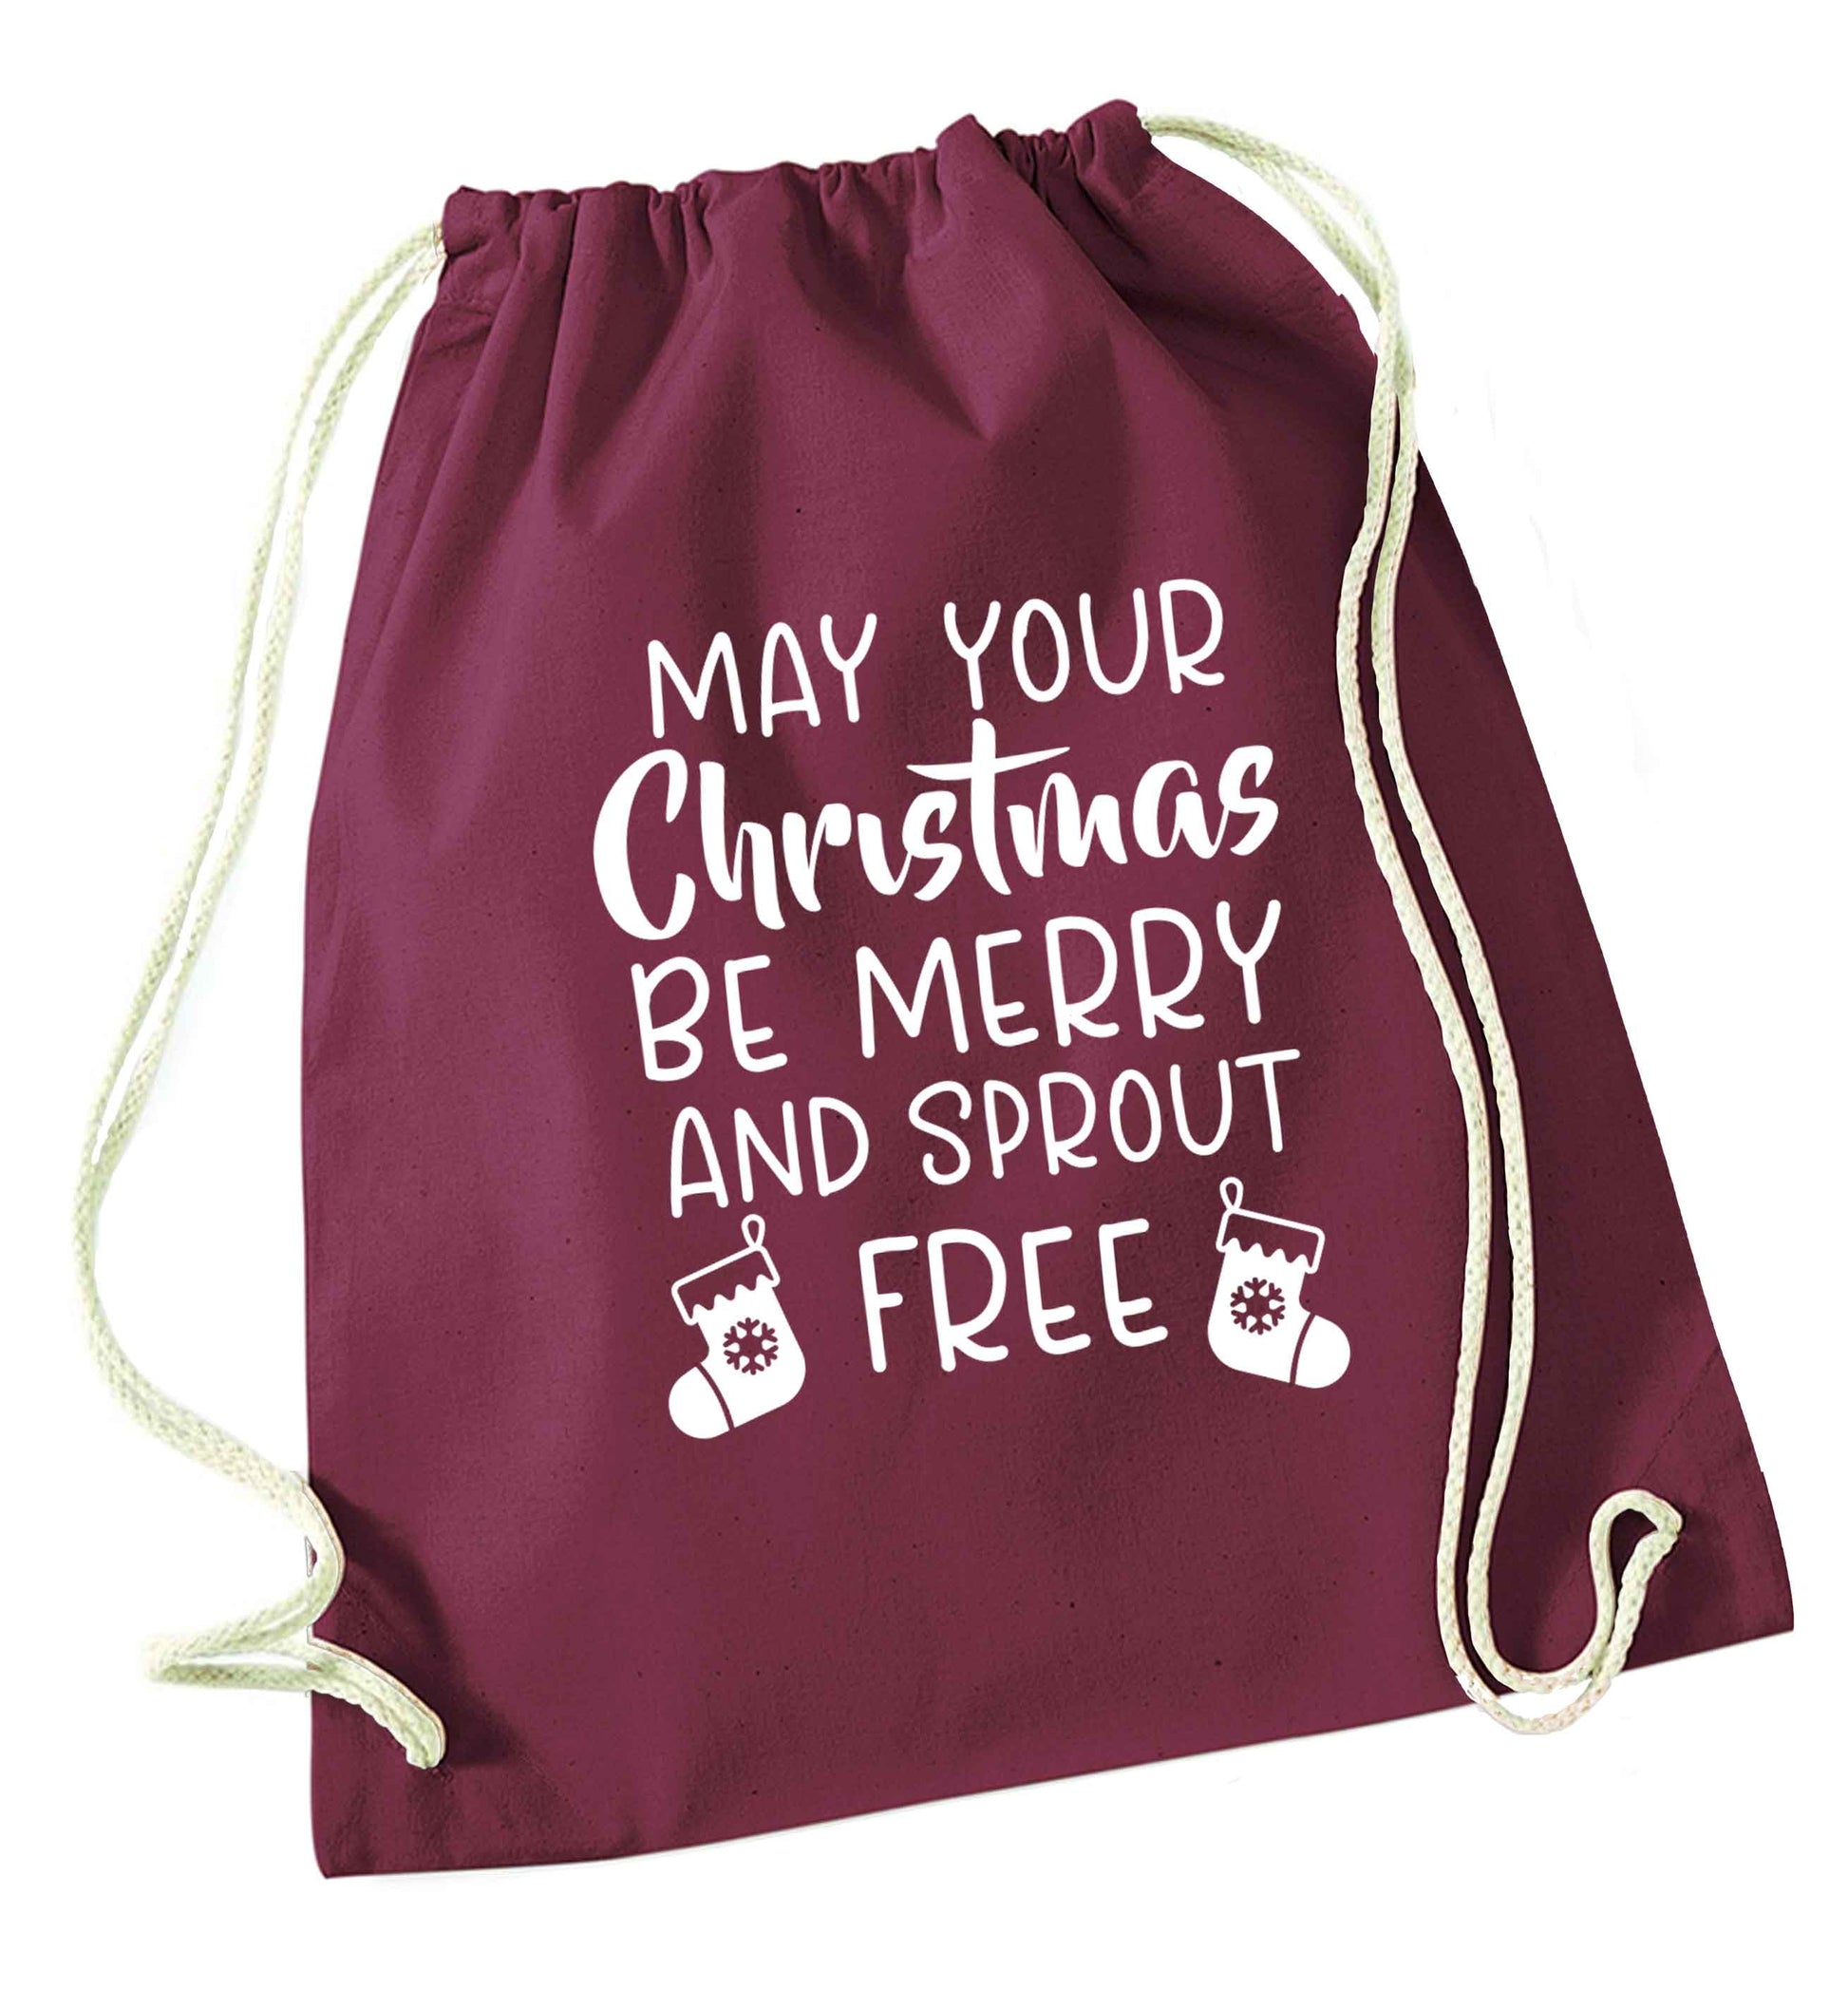 May your Christmas be merry and sprout free maroon drawstring bag